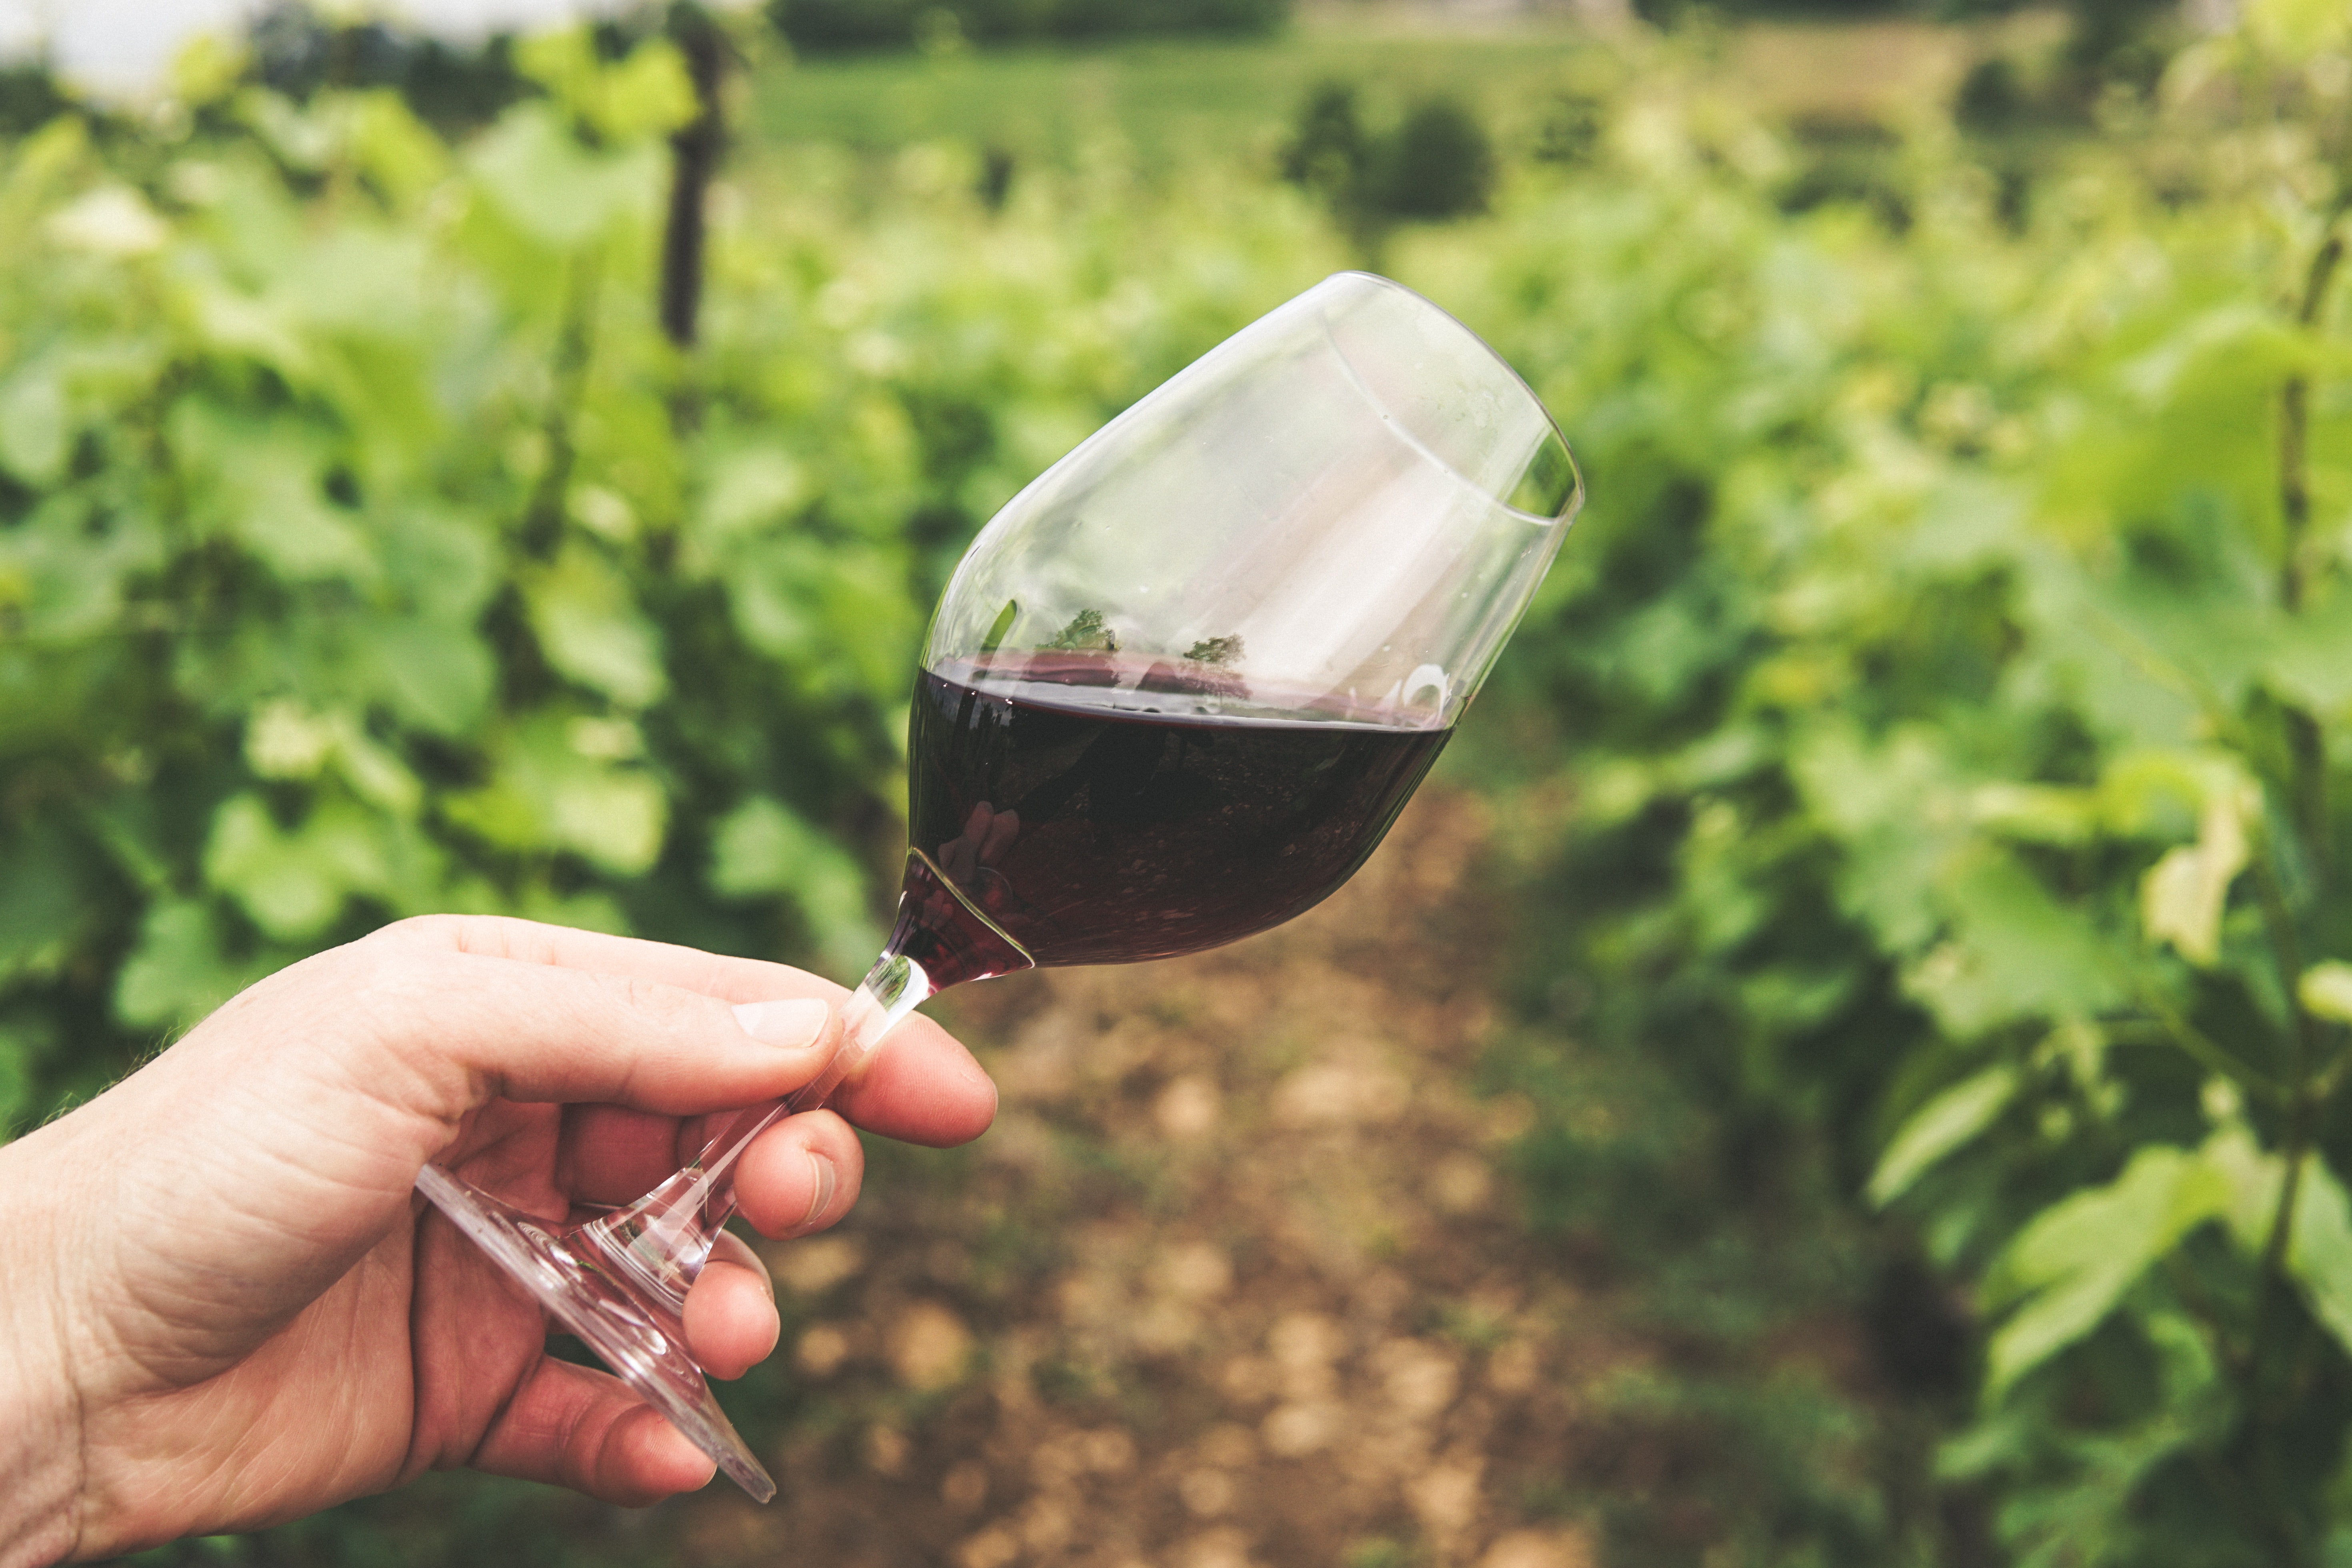 Person holding a glass of red wine at a farm. Only the person's hand is shown.